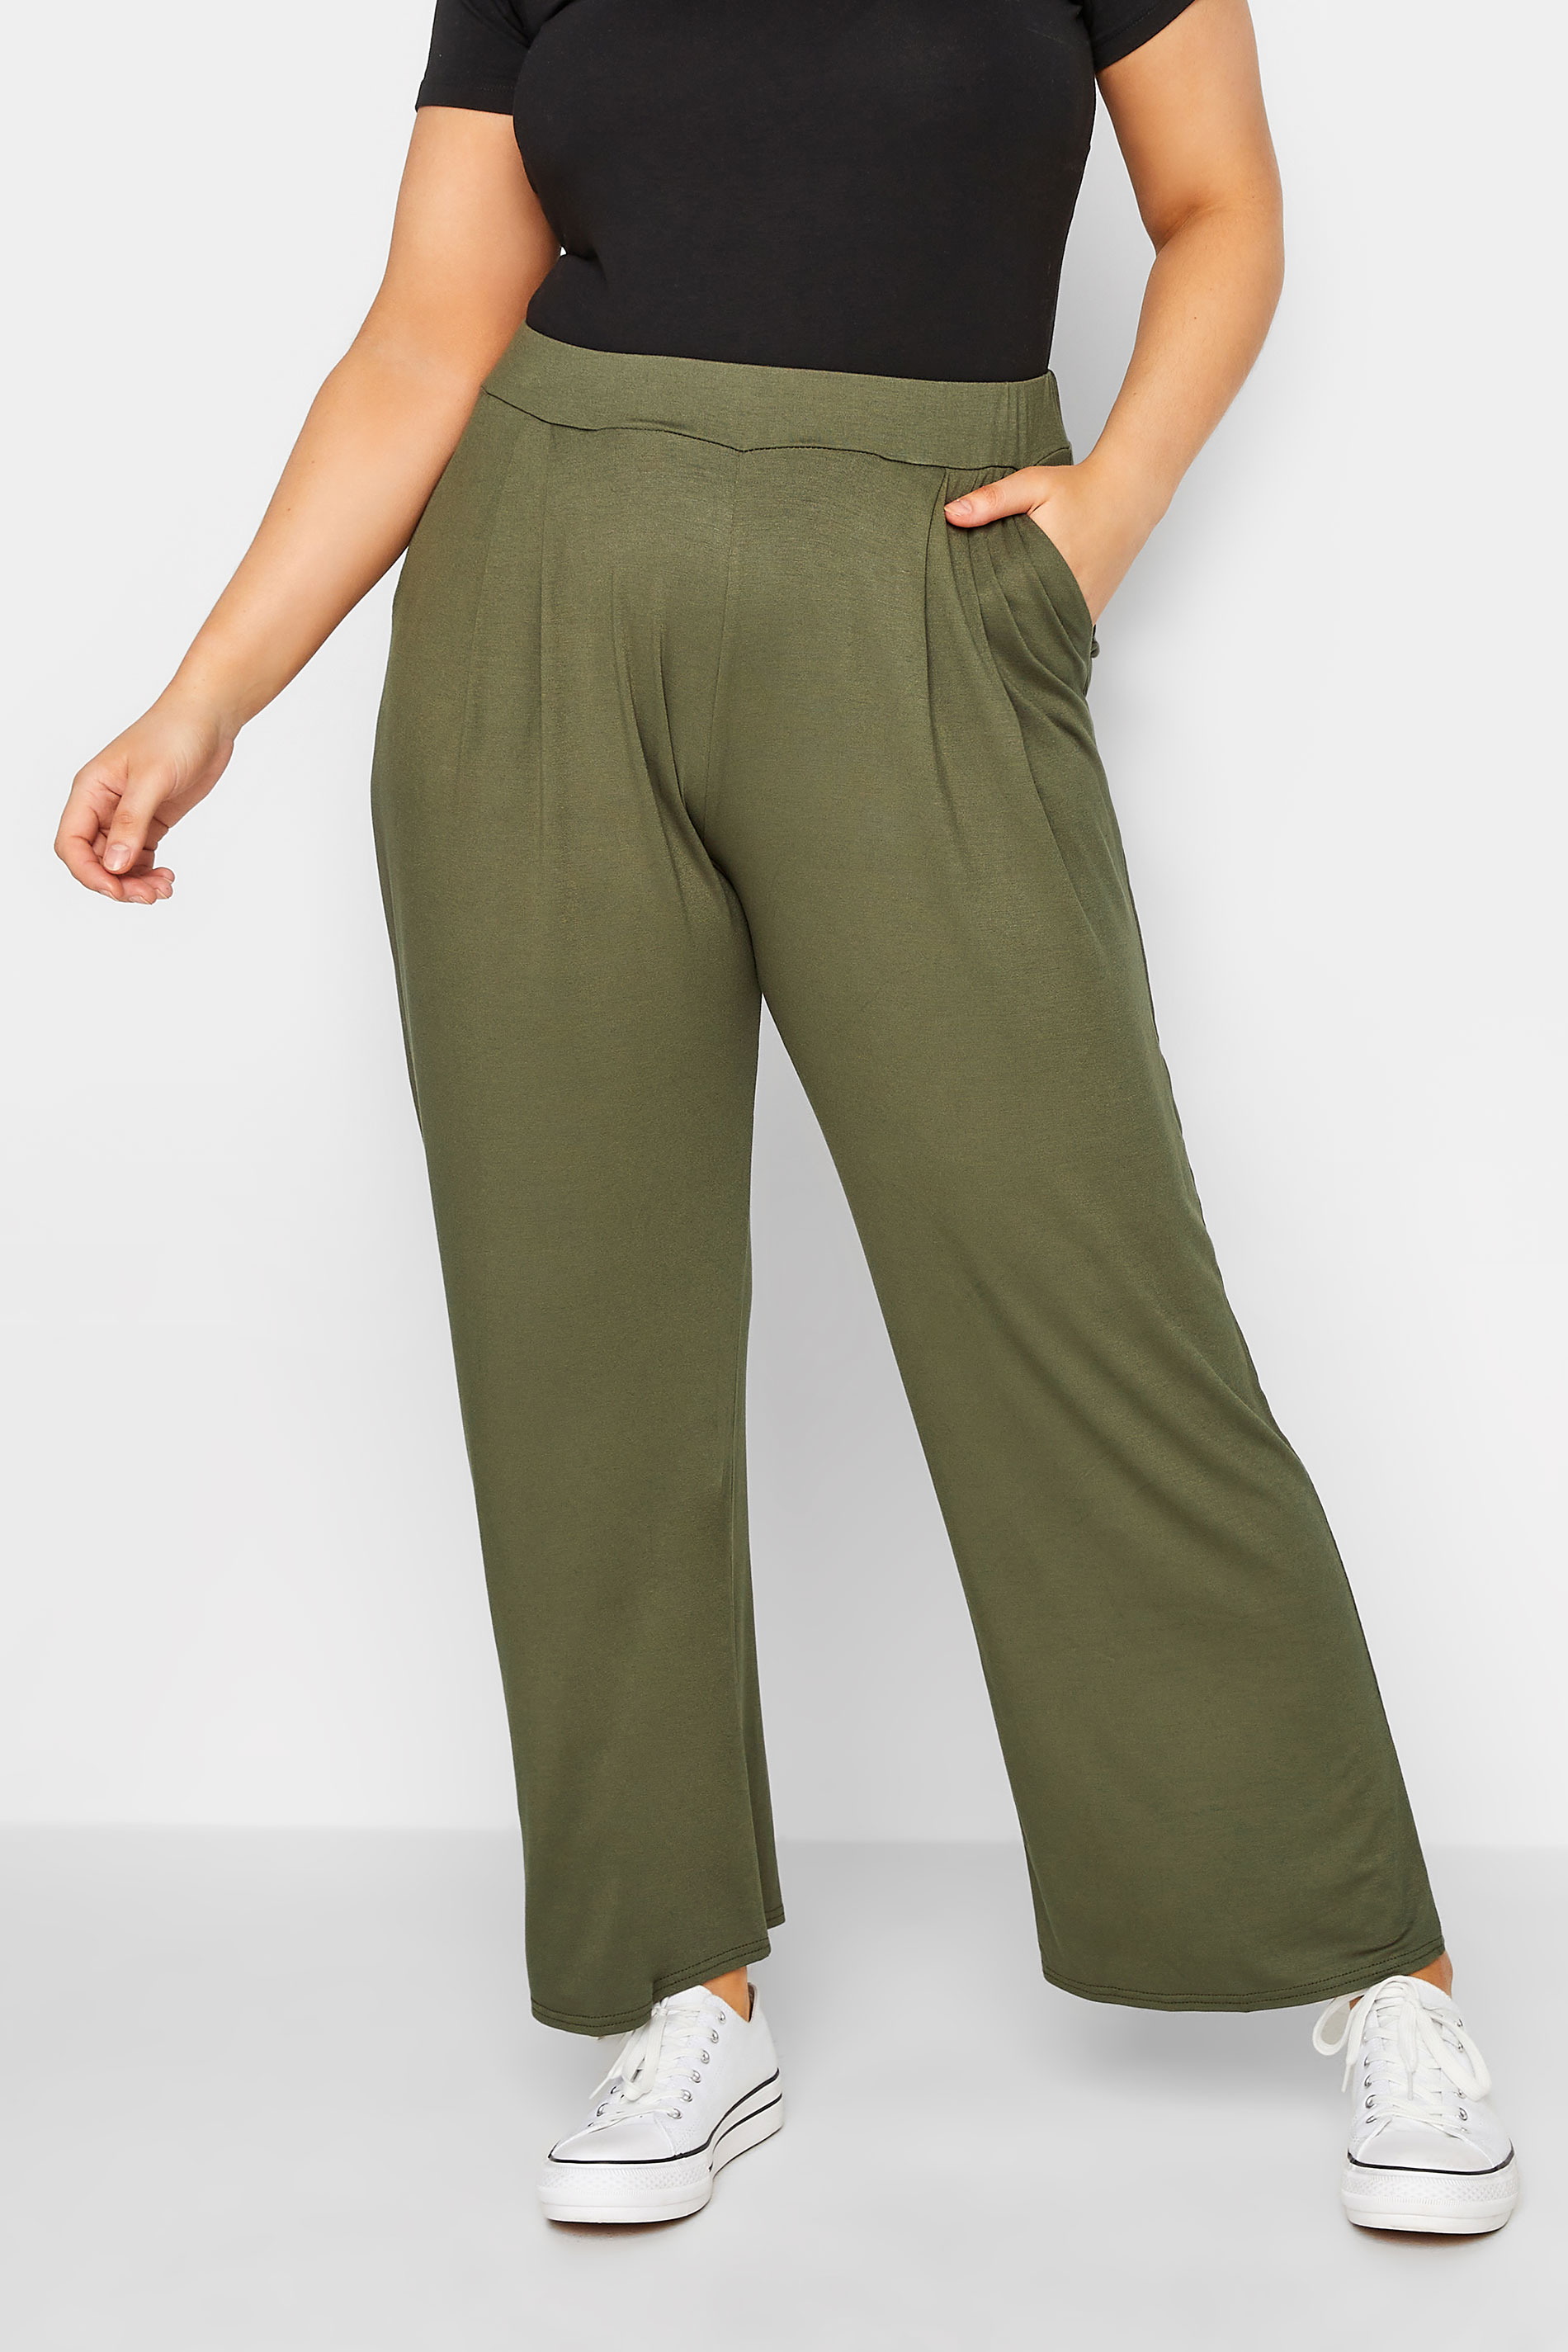 YOURS Plus Size Khaki Green Pleat Front Wide Leg Trousers | Yours Clothing